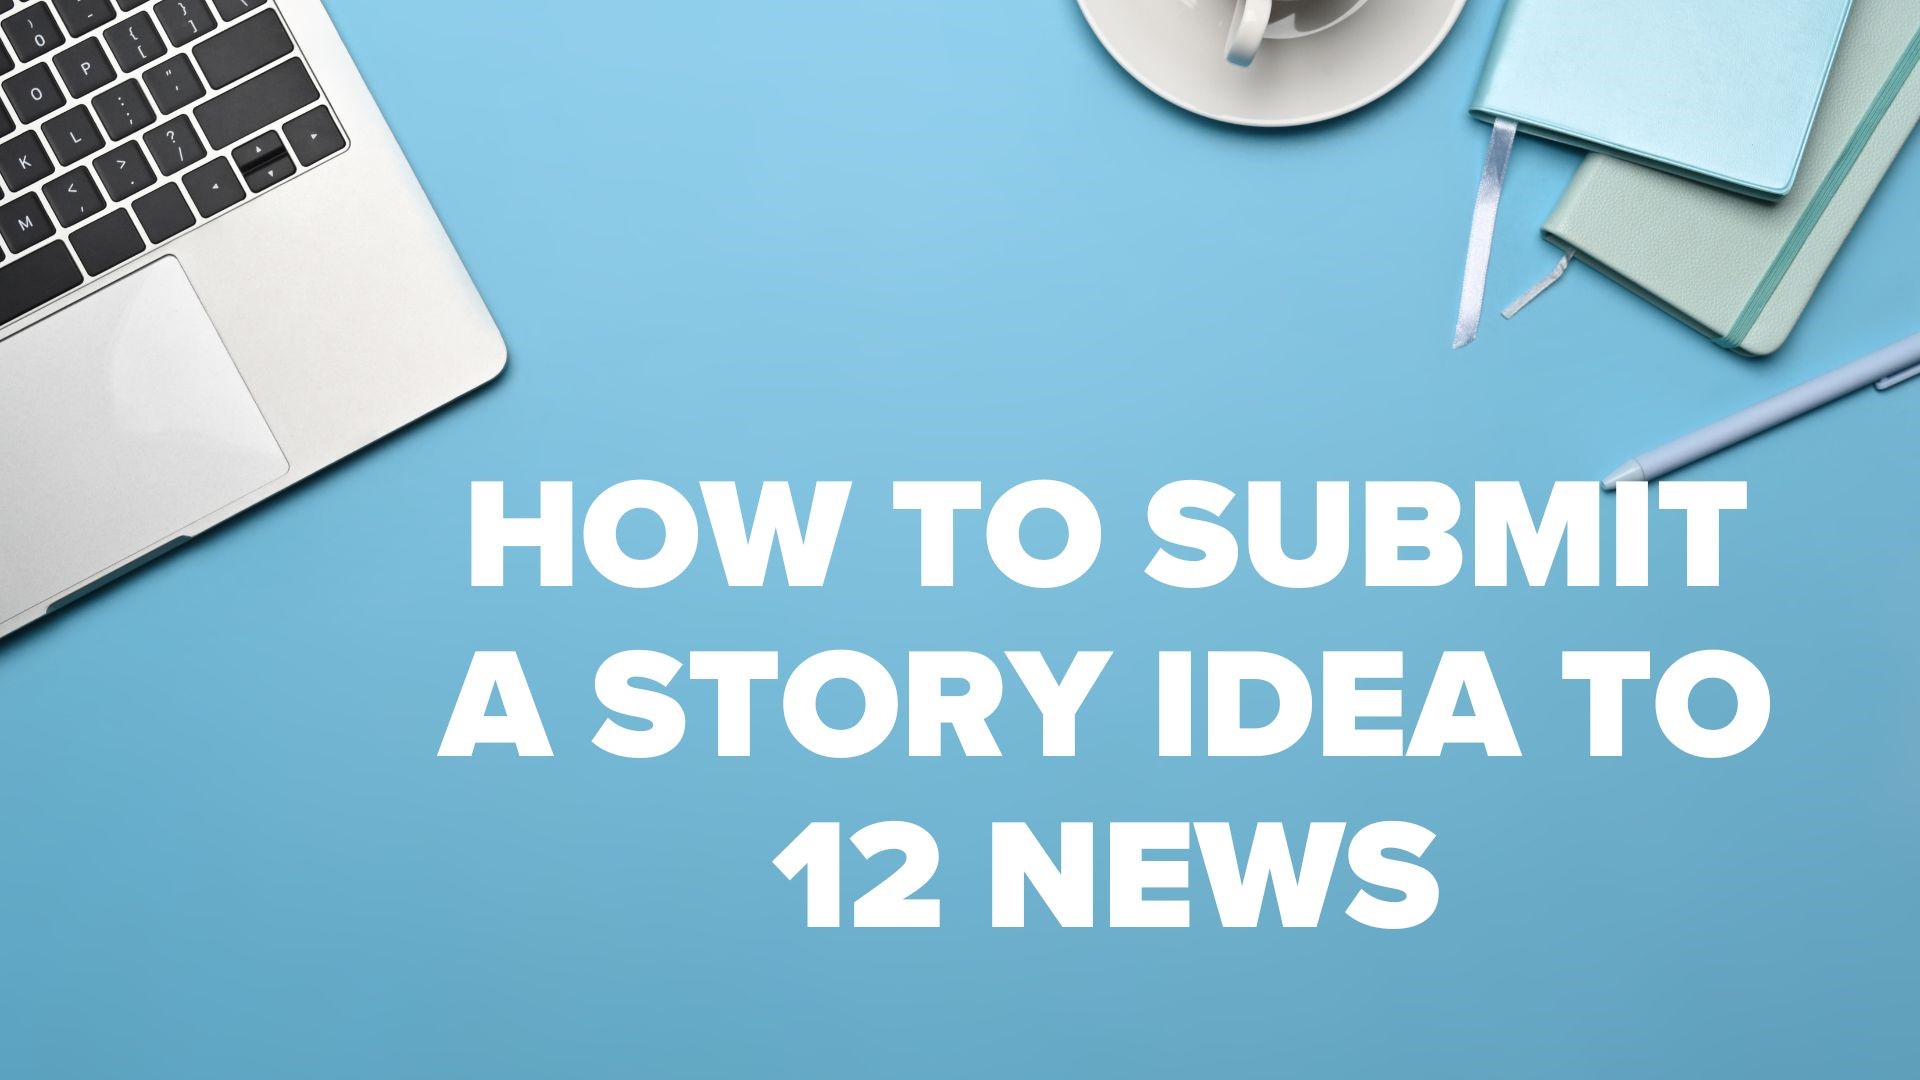 If you have a possible story idea, please send it to connect@12news.com or 602-444-1212.